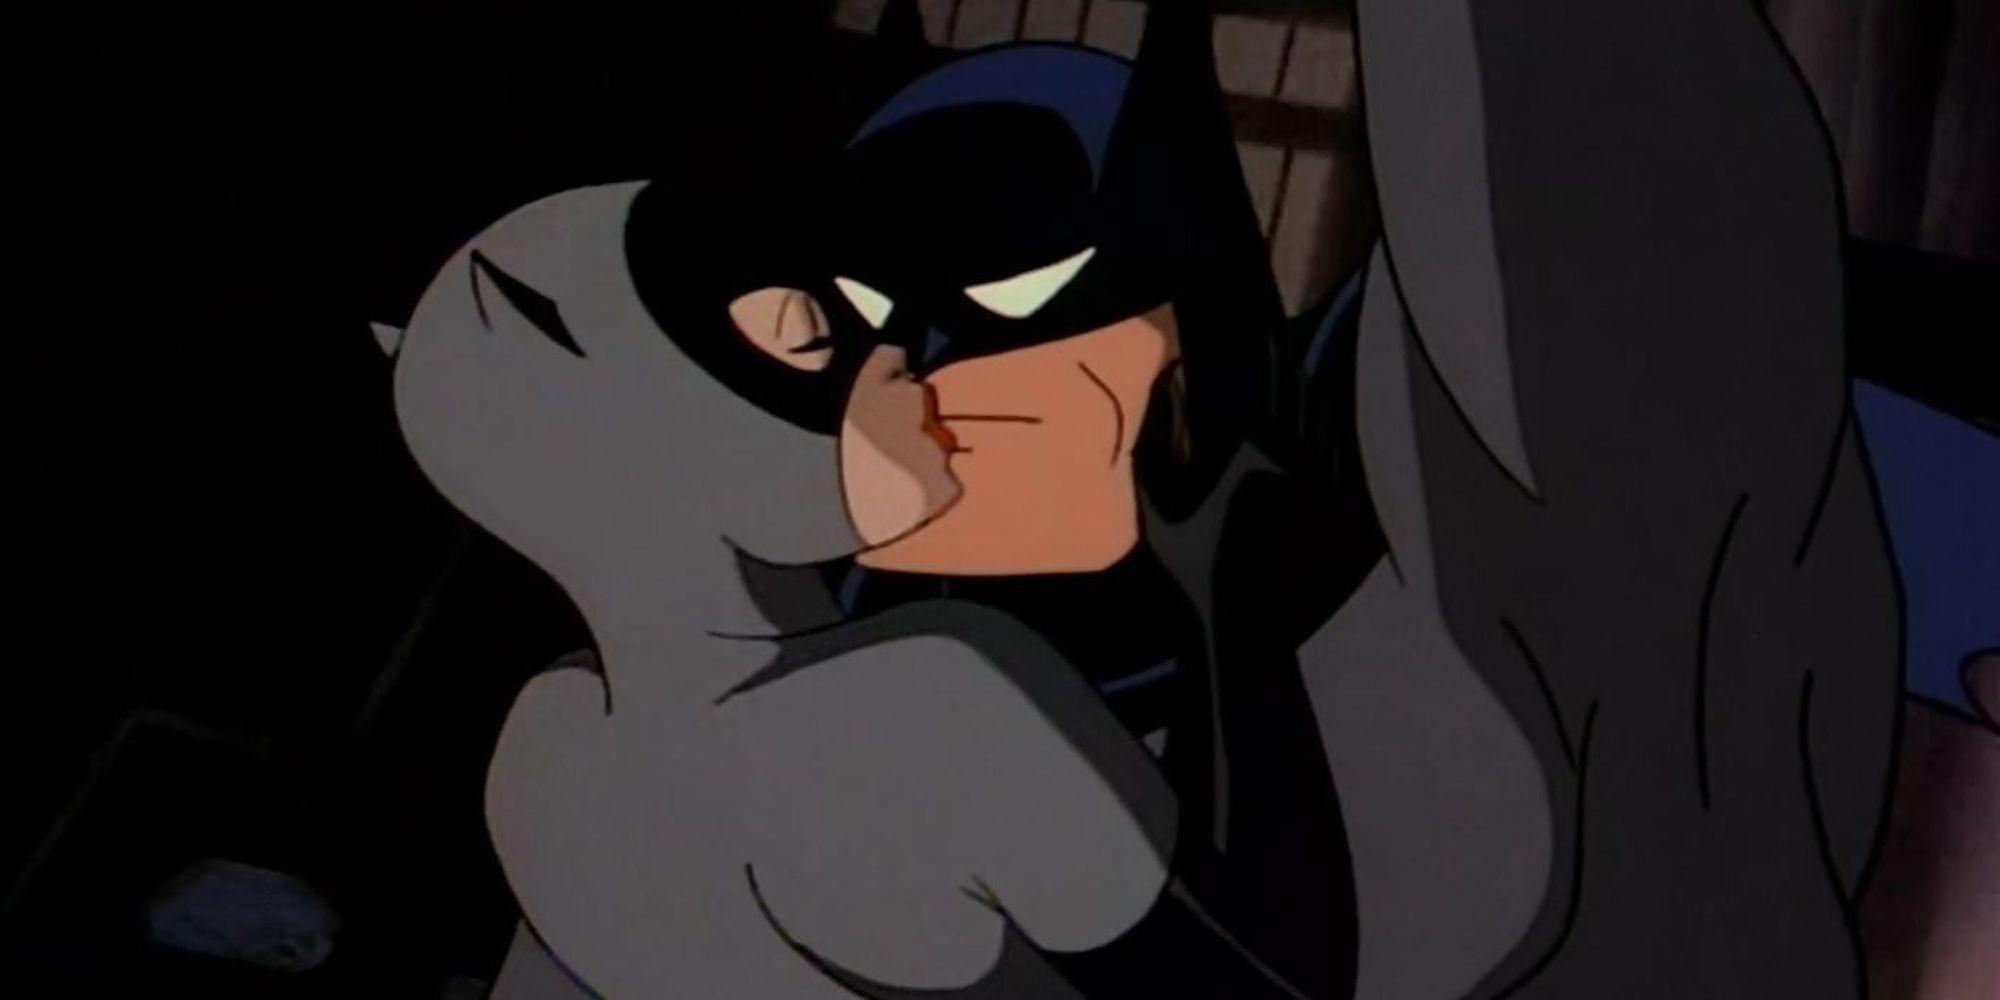 Batman’s 10 Best Friendships In The DCAU, Ranked By Story Impact